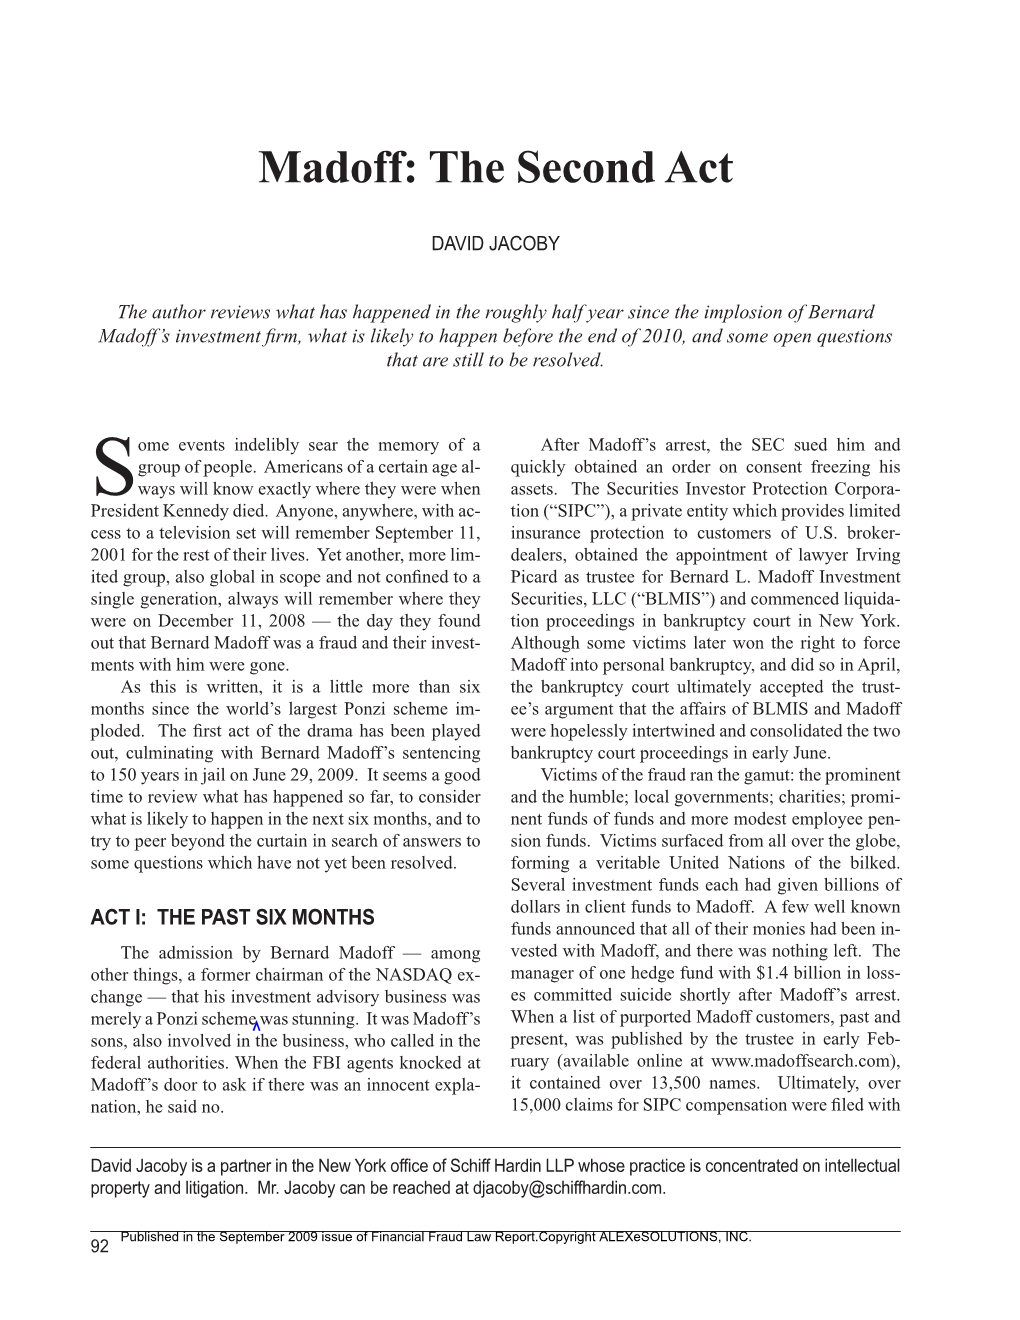 Madoff: the Second Act